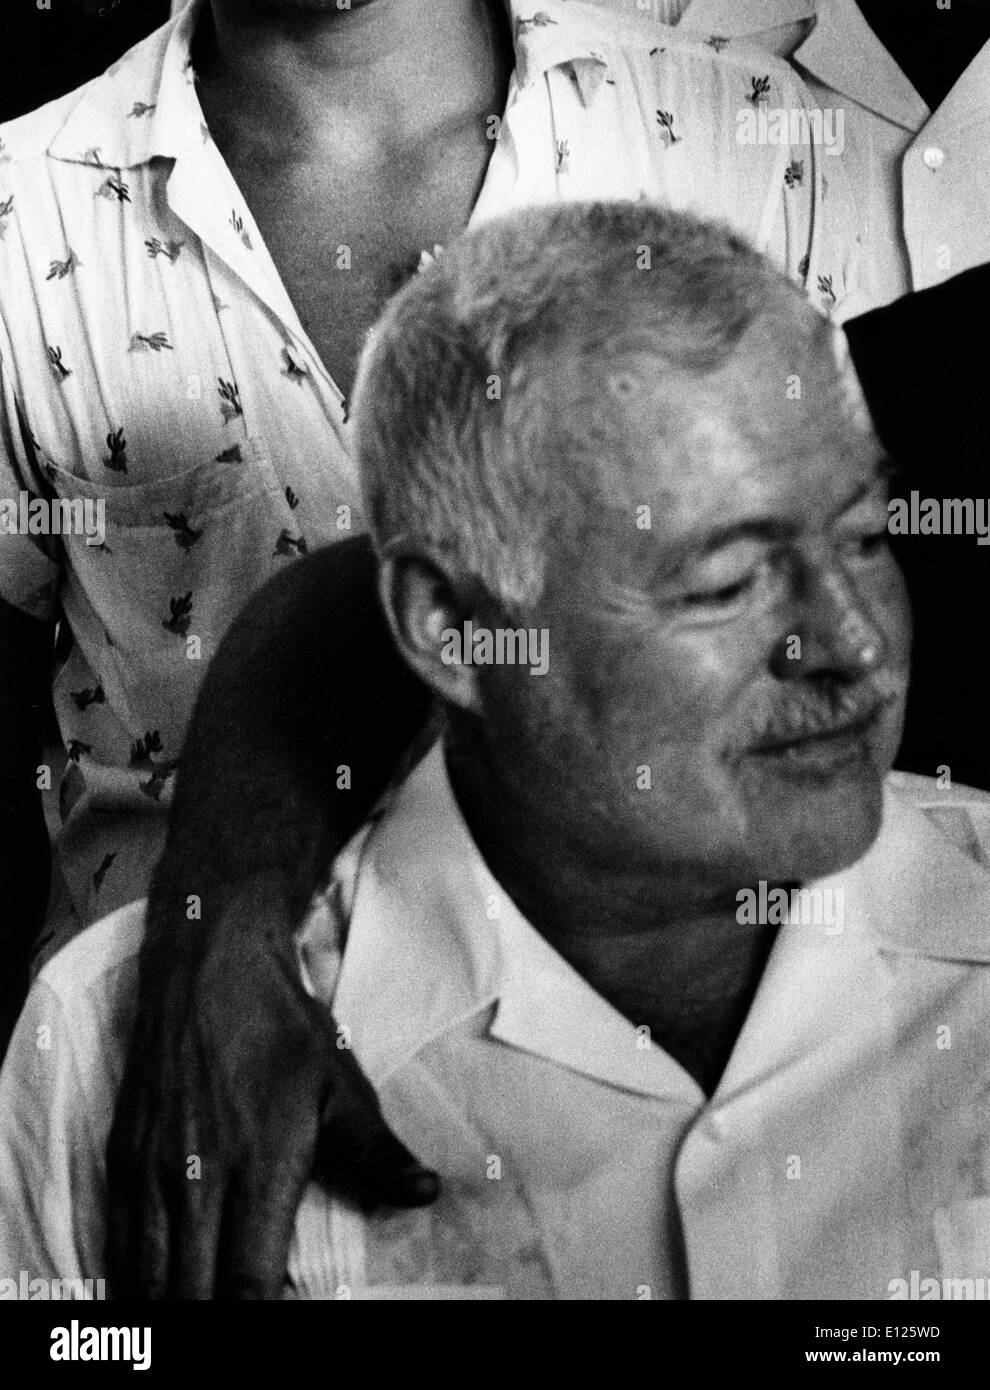 Apr 22, 2005; Havana, CUBA; (File Photo. Date Unknown) American novelist and short-story writer ERNEST HEMINGWAY surrounded by friends and fans in Havana, Cuba, where he lived for over 20 years of his life.. (Credit Image: KEYSTONE Pictures USA/ZUMAPRESS.com) Stock Photo